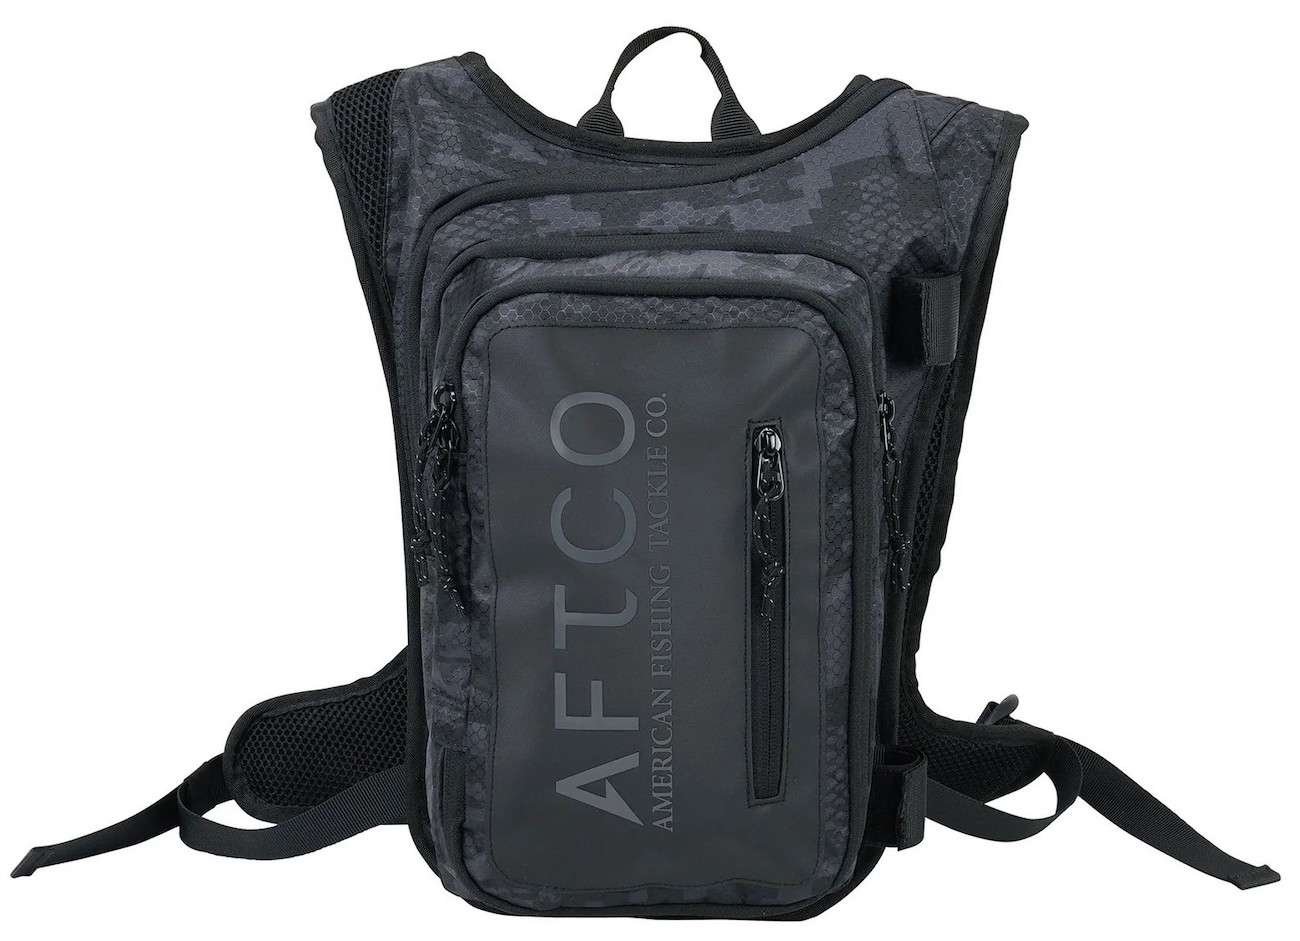 AFTCO Fishing Backpack